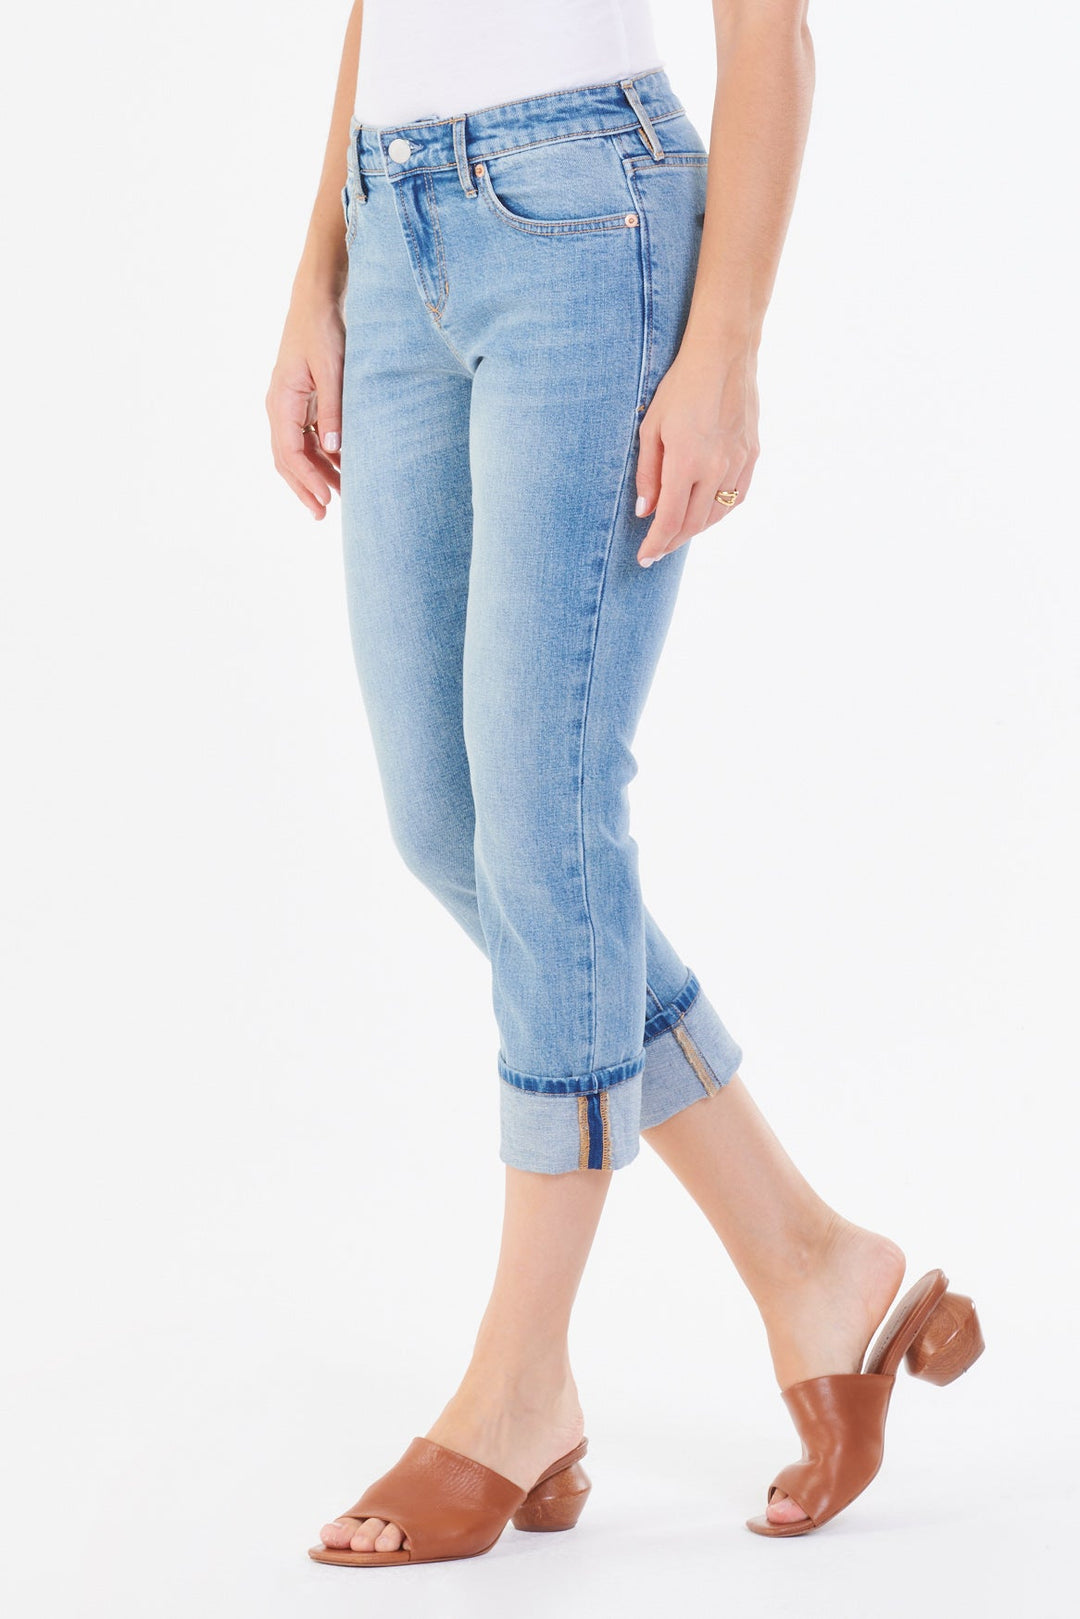 image of a female model wearing a BLAIRE HIGH RISE CUFFED SLIM STRAIGHT LEG JEANS DAYLIGHT JEANS